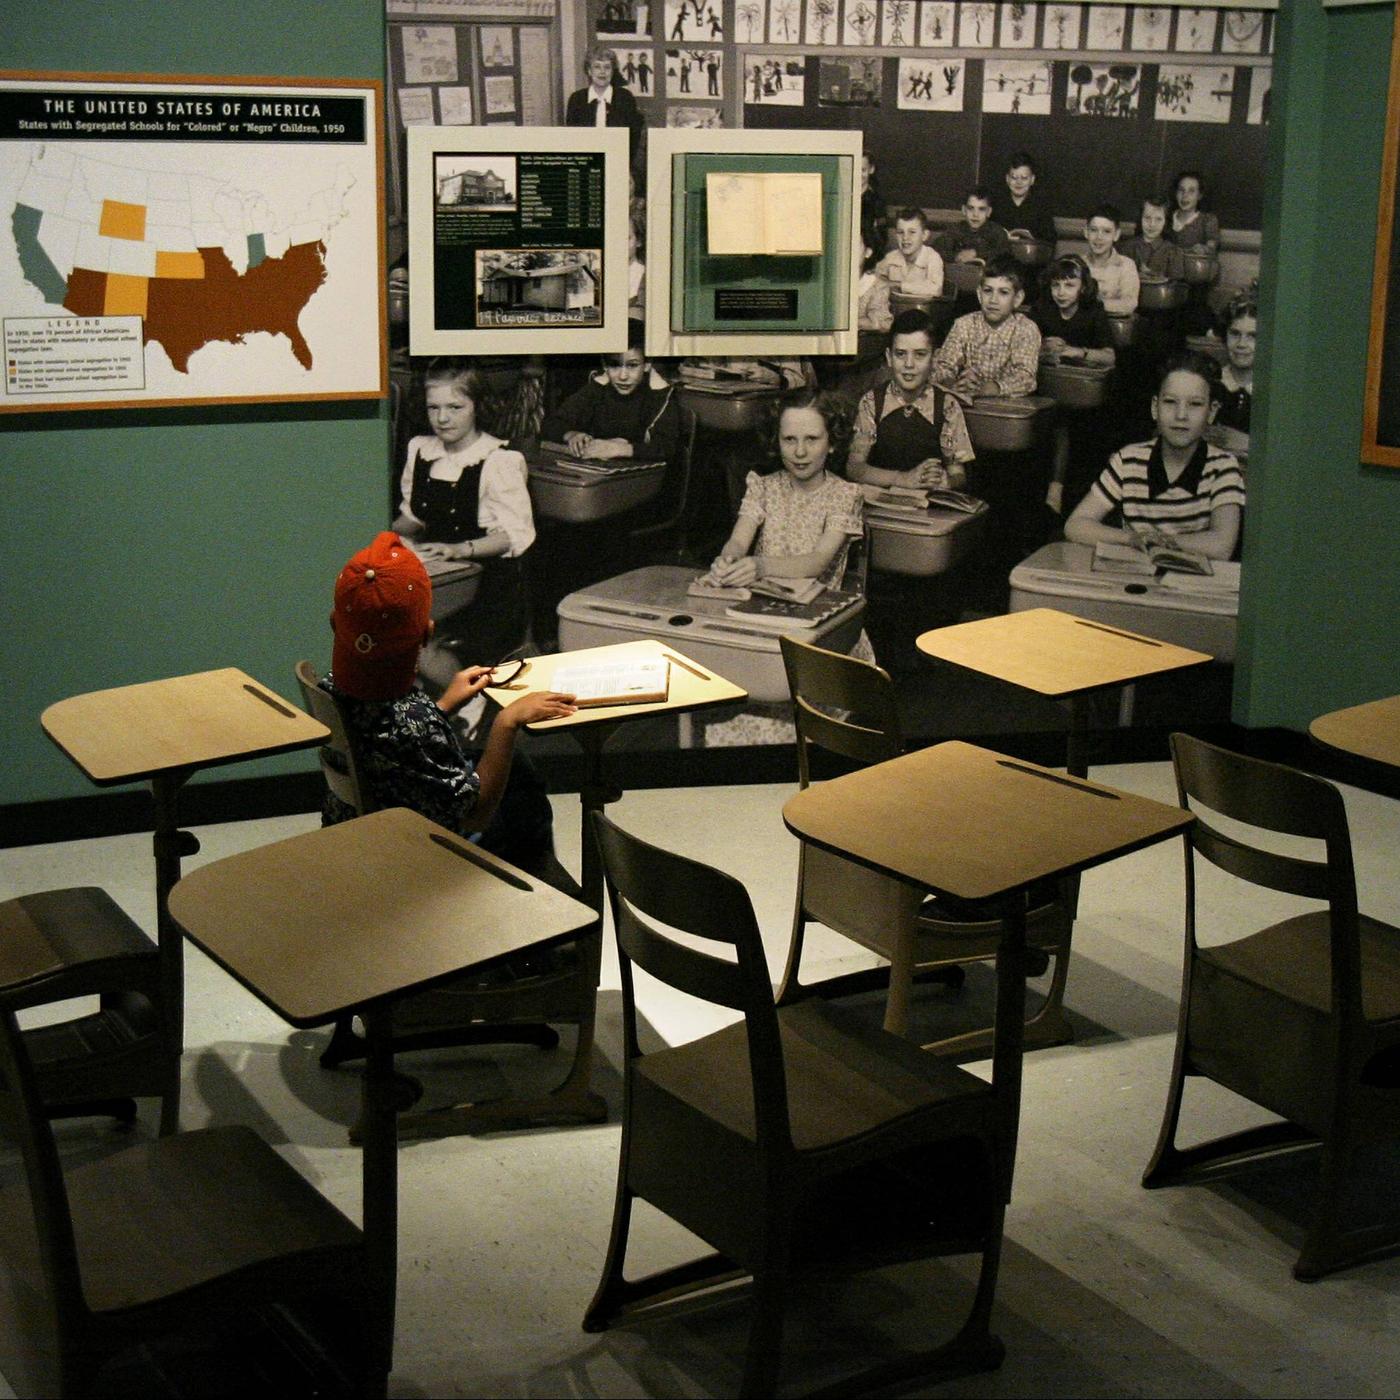 60 Years After 'Brown,' What Still Divides America's Classrooms?